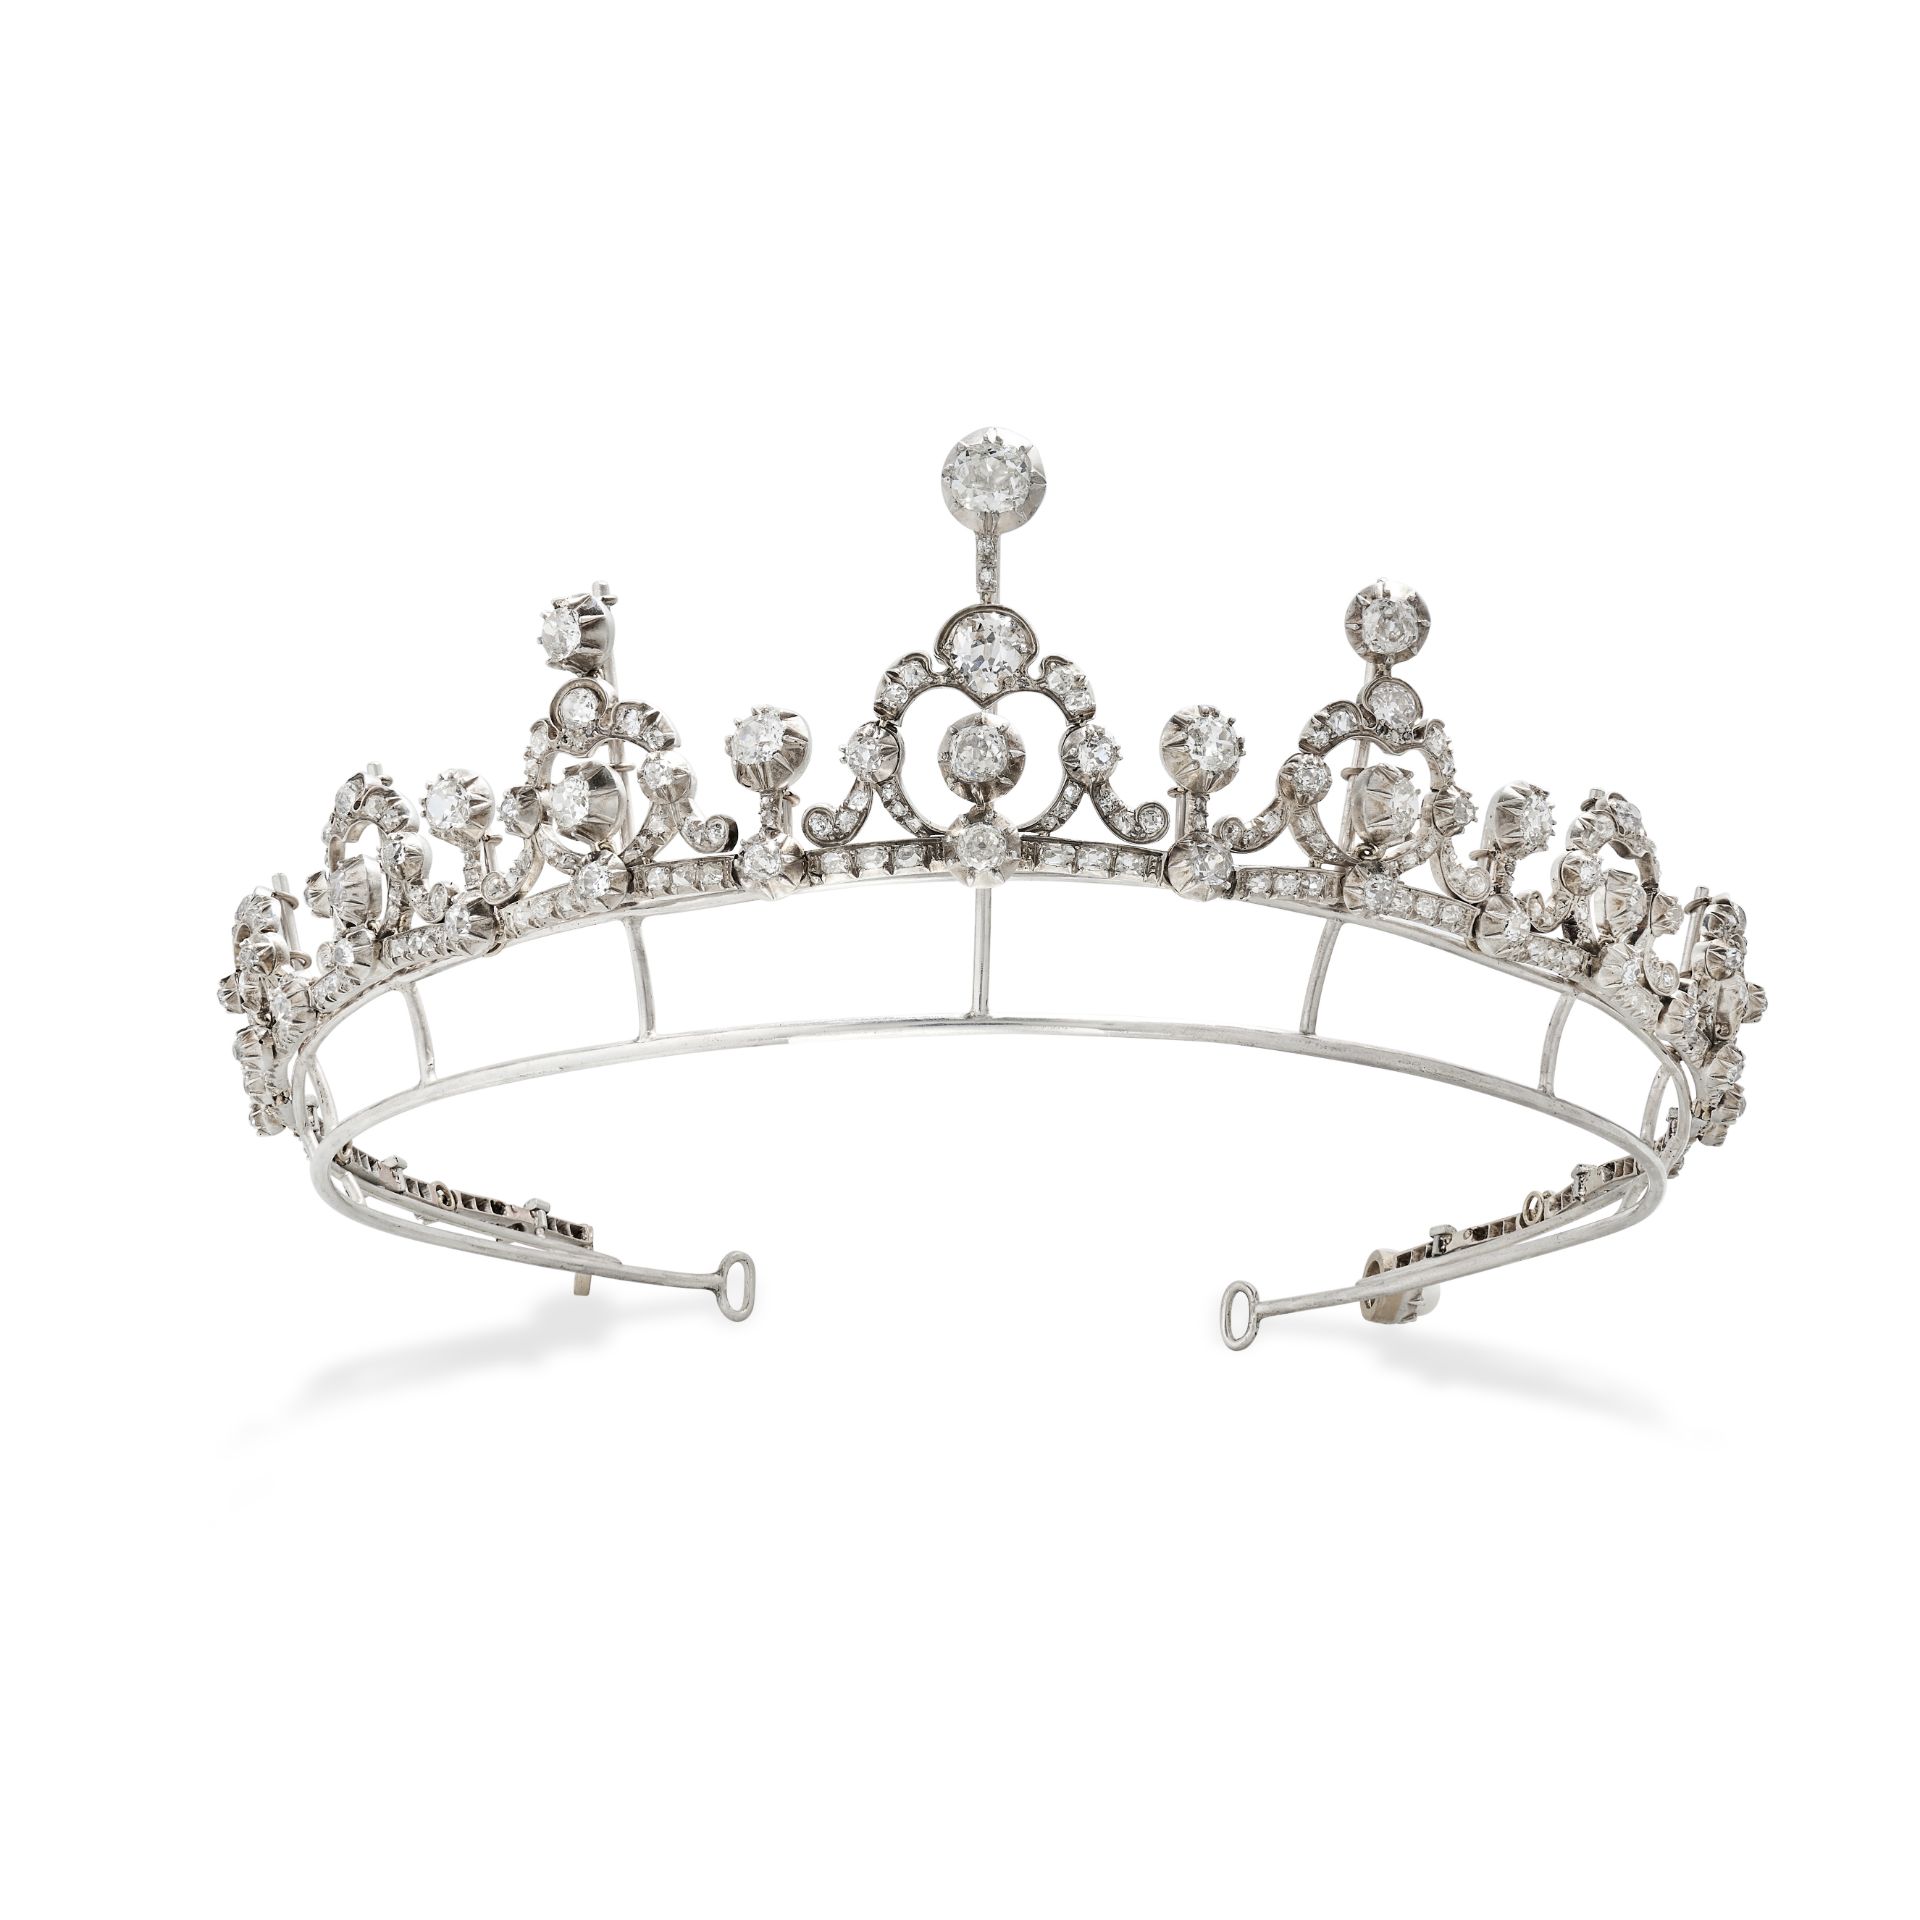 A FINE ANTIQUE FRENCH DIAMOND AND PEARL TIARA in yellow gold and silver, set throughout with old ...